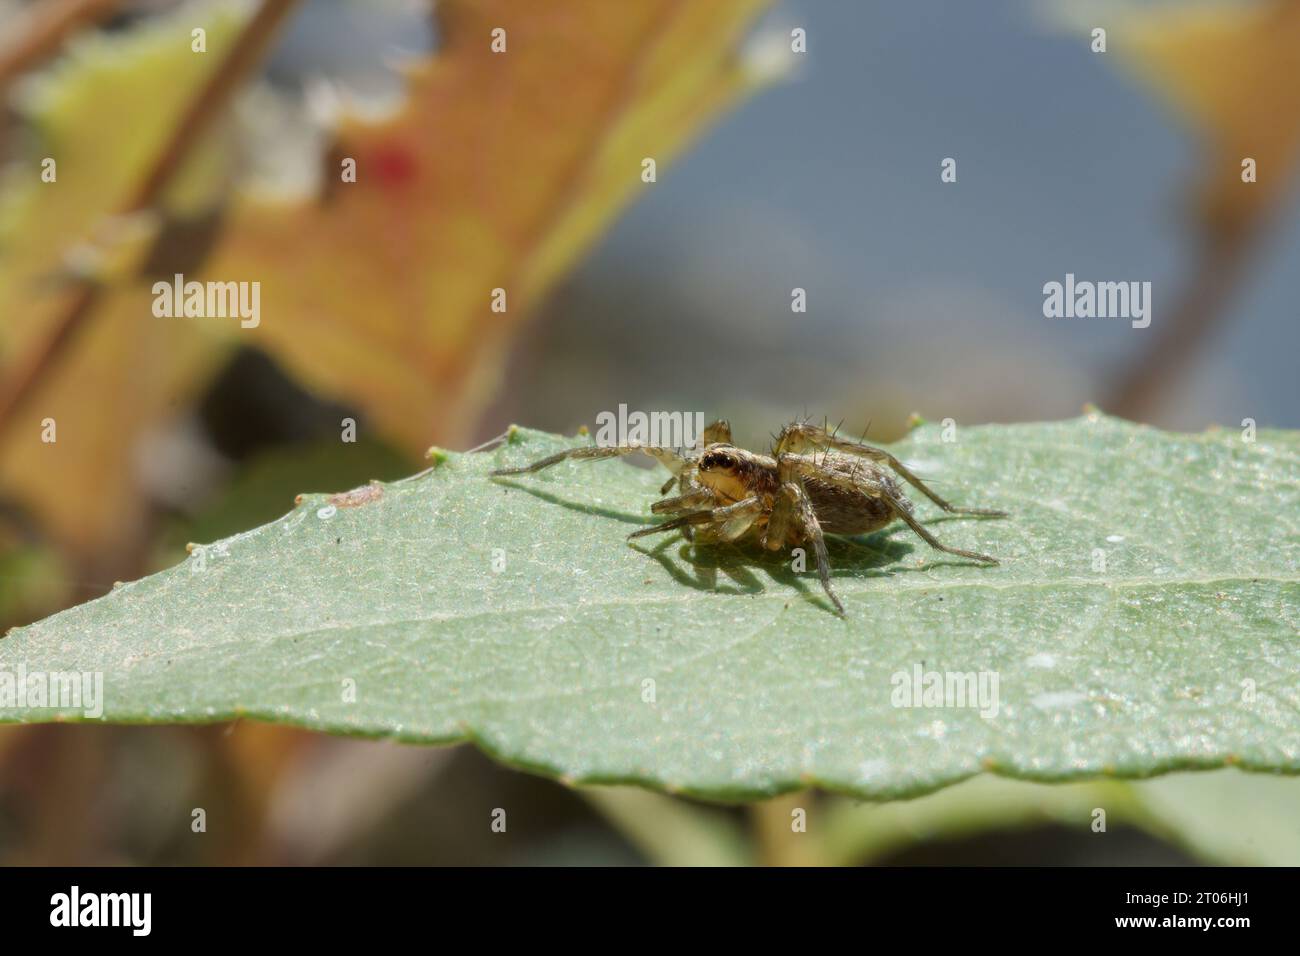 Small spider on green leaf of plant in a river Stock Photo